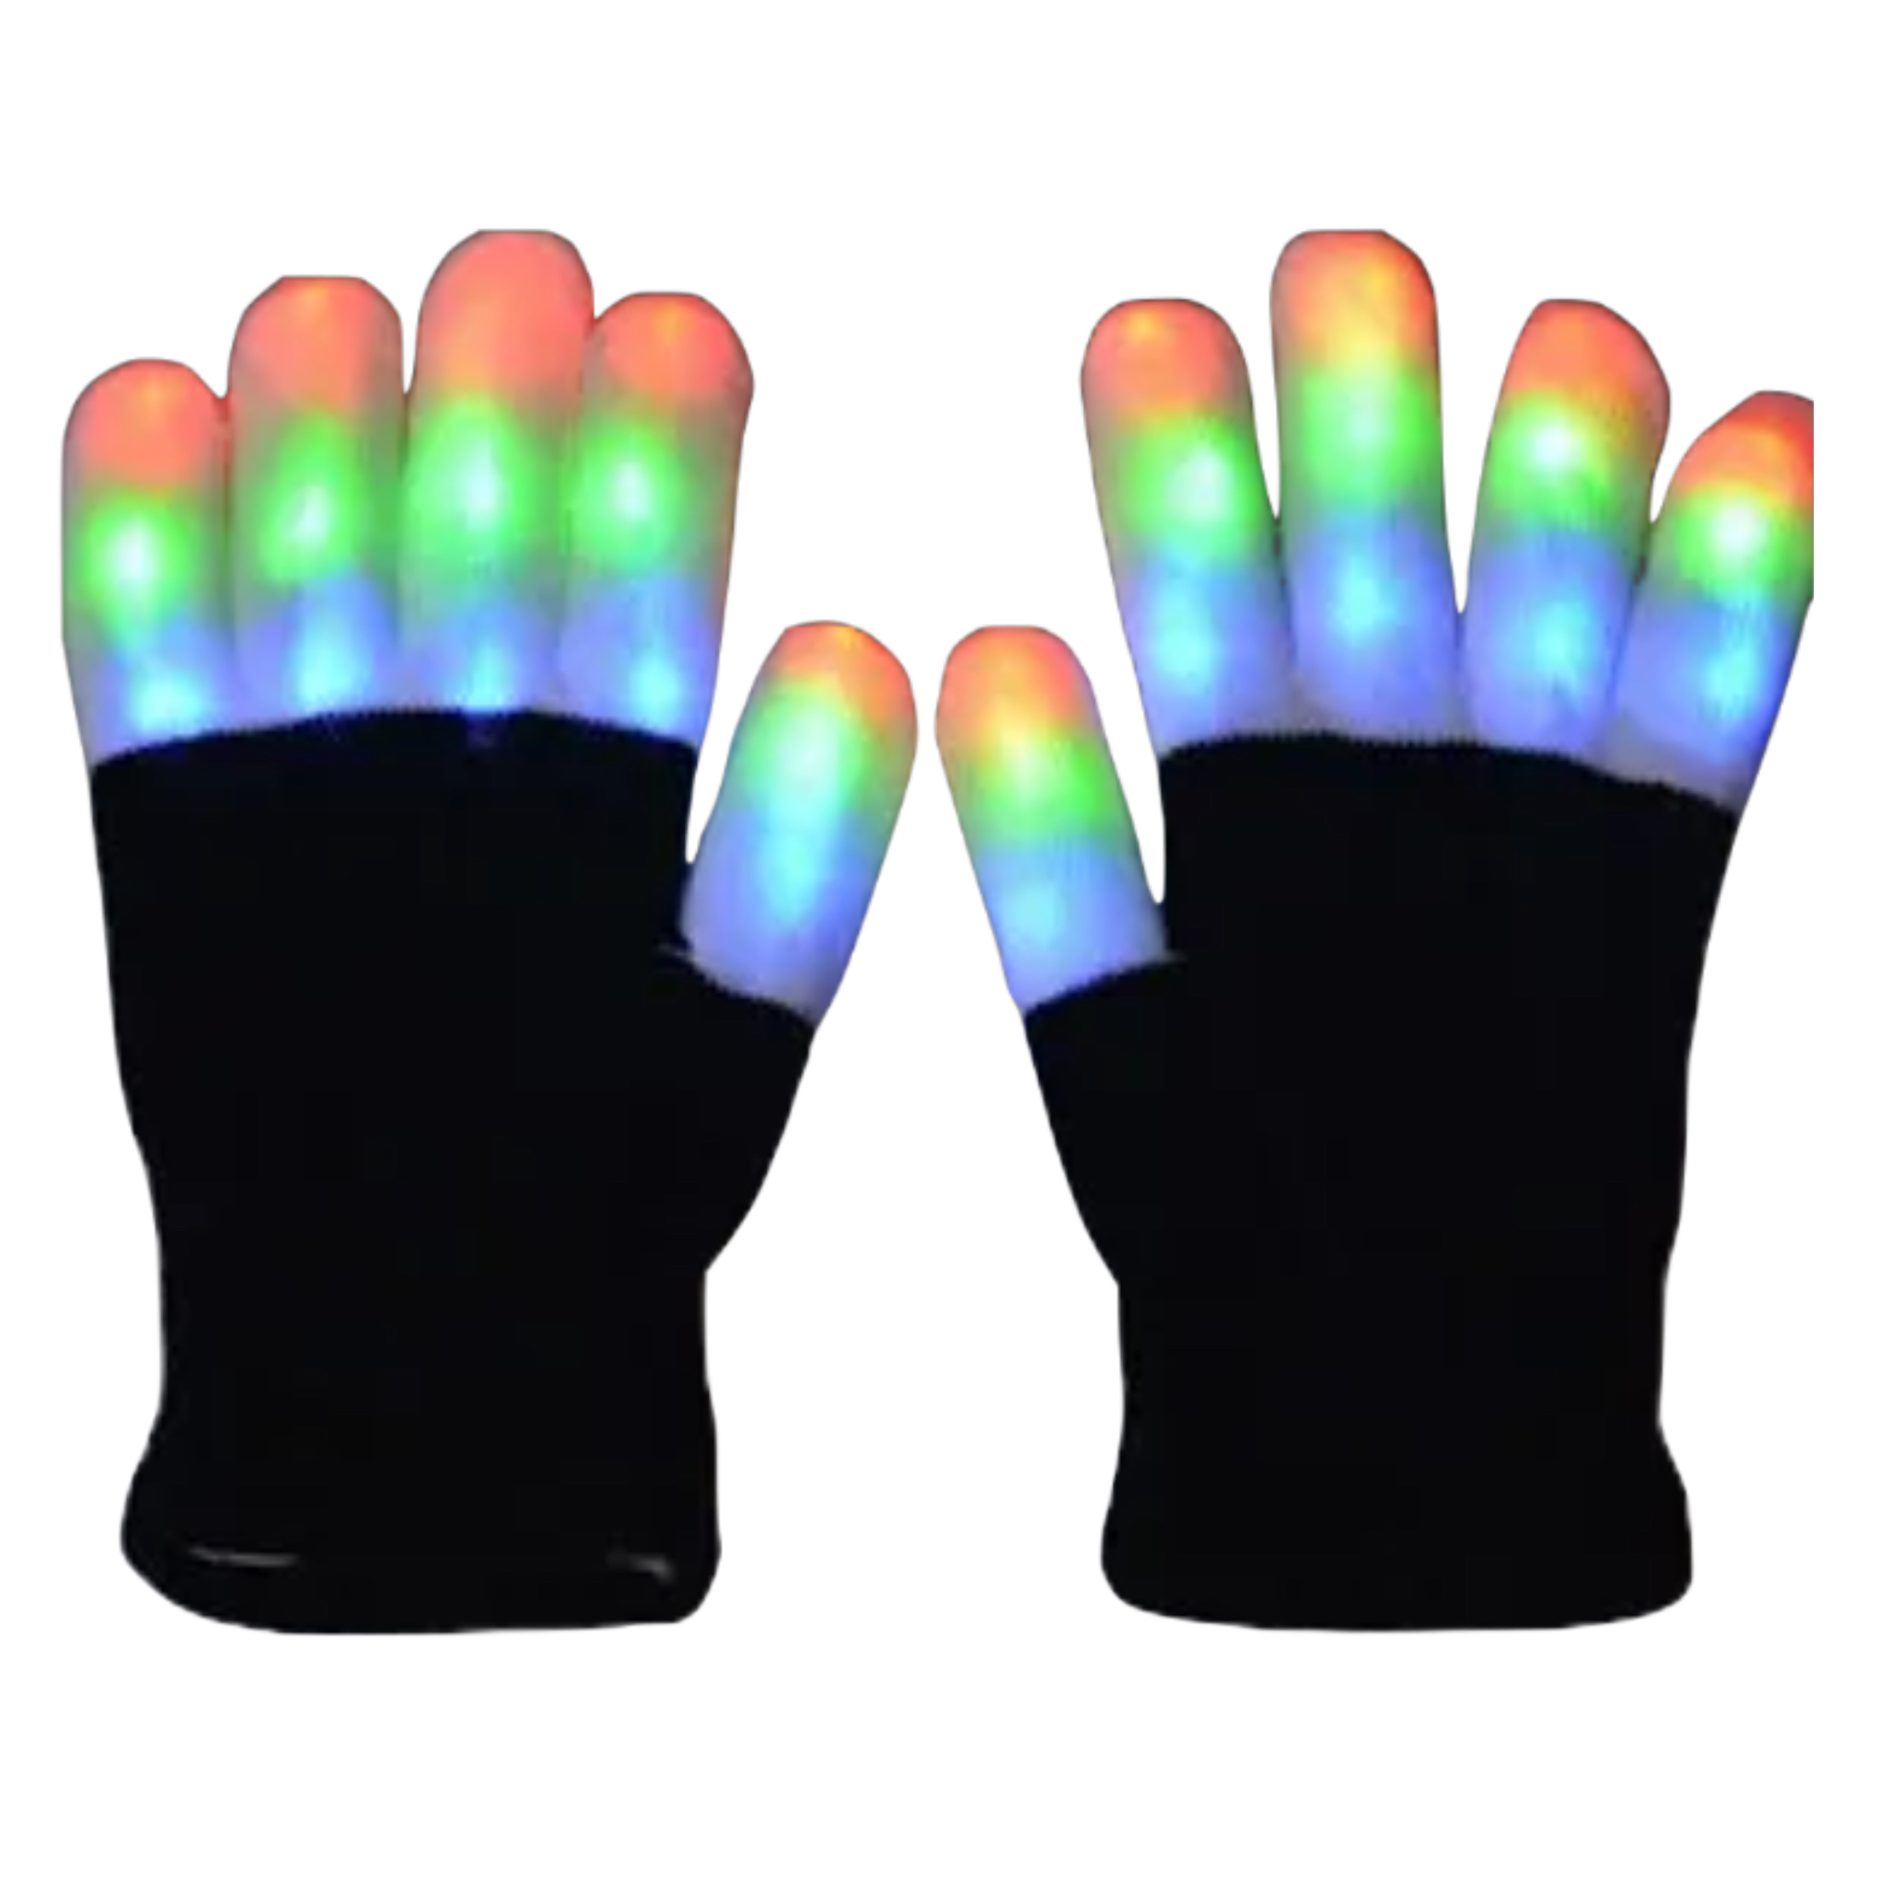 Black and White Gloves with Multicolor LED Fingers All Products